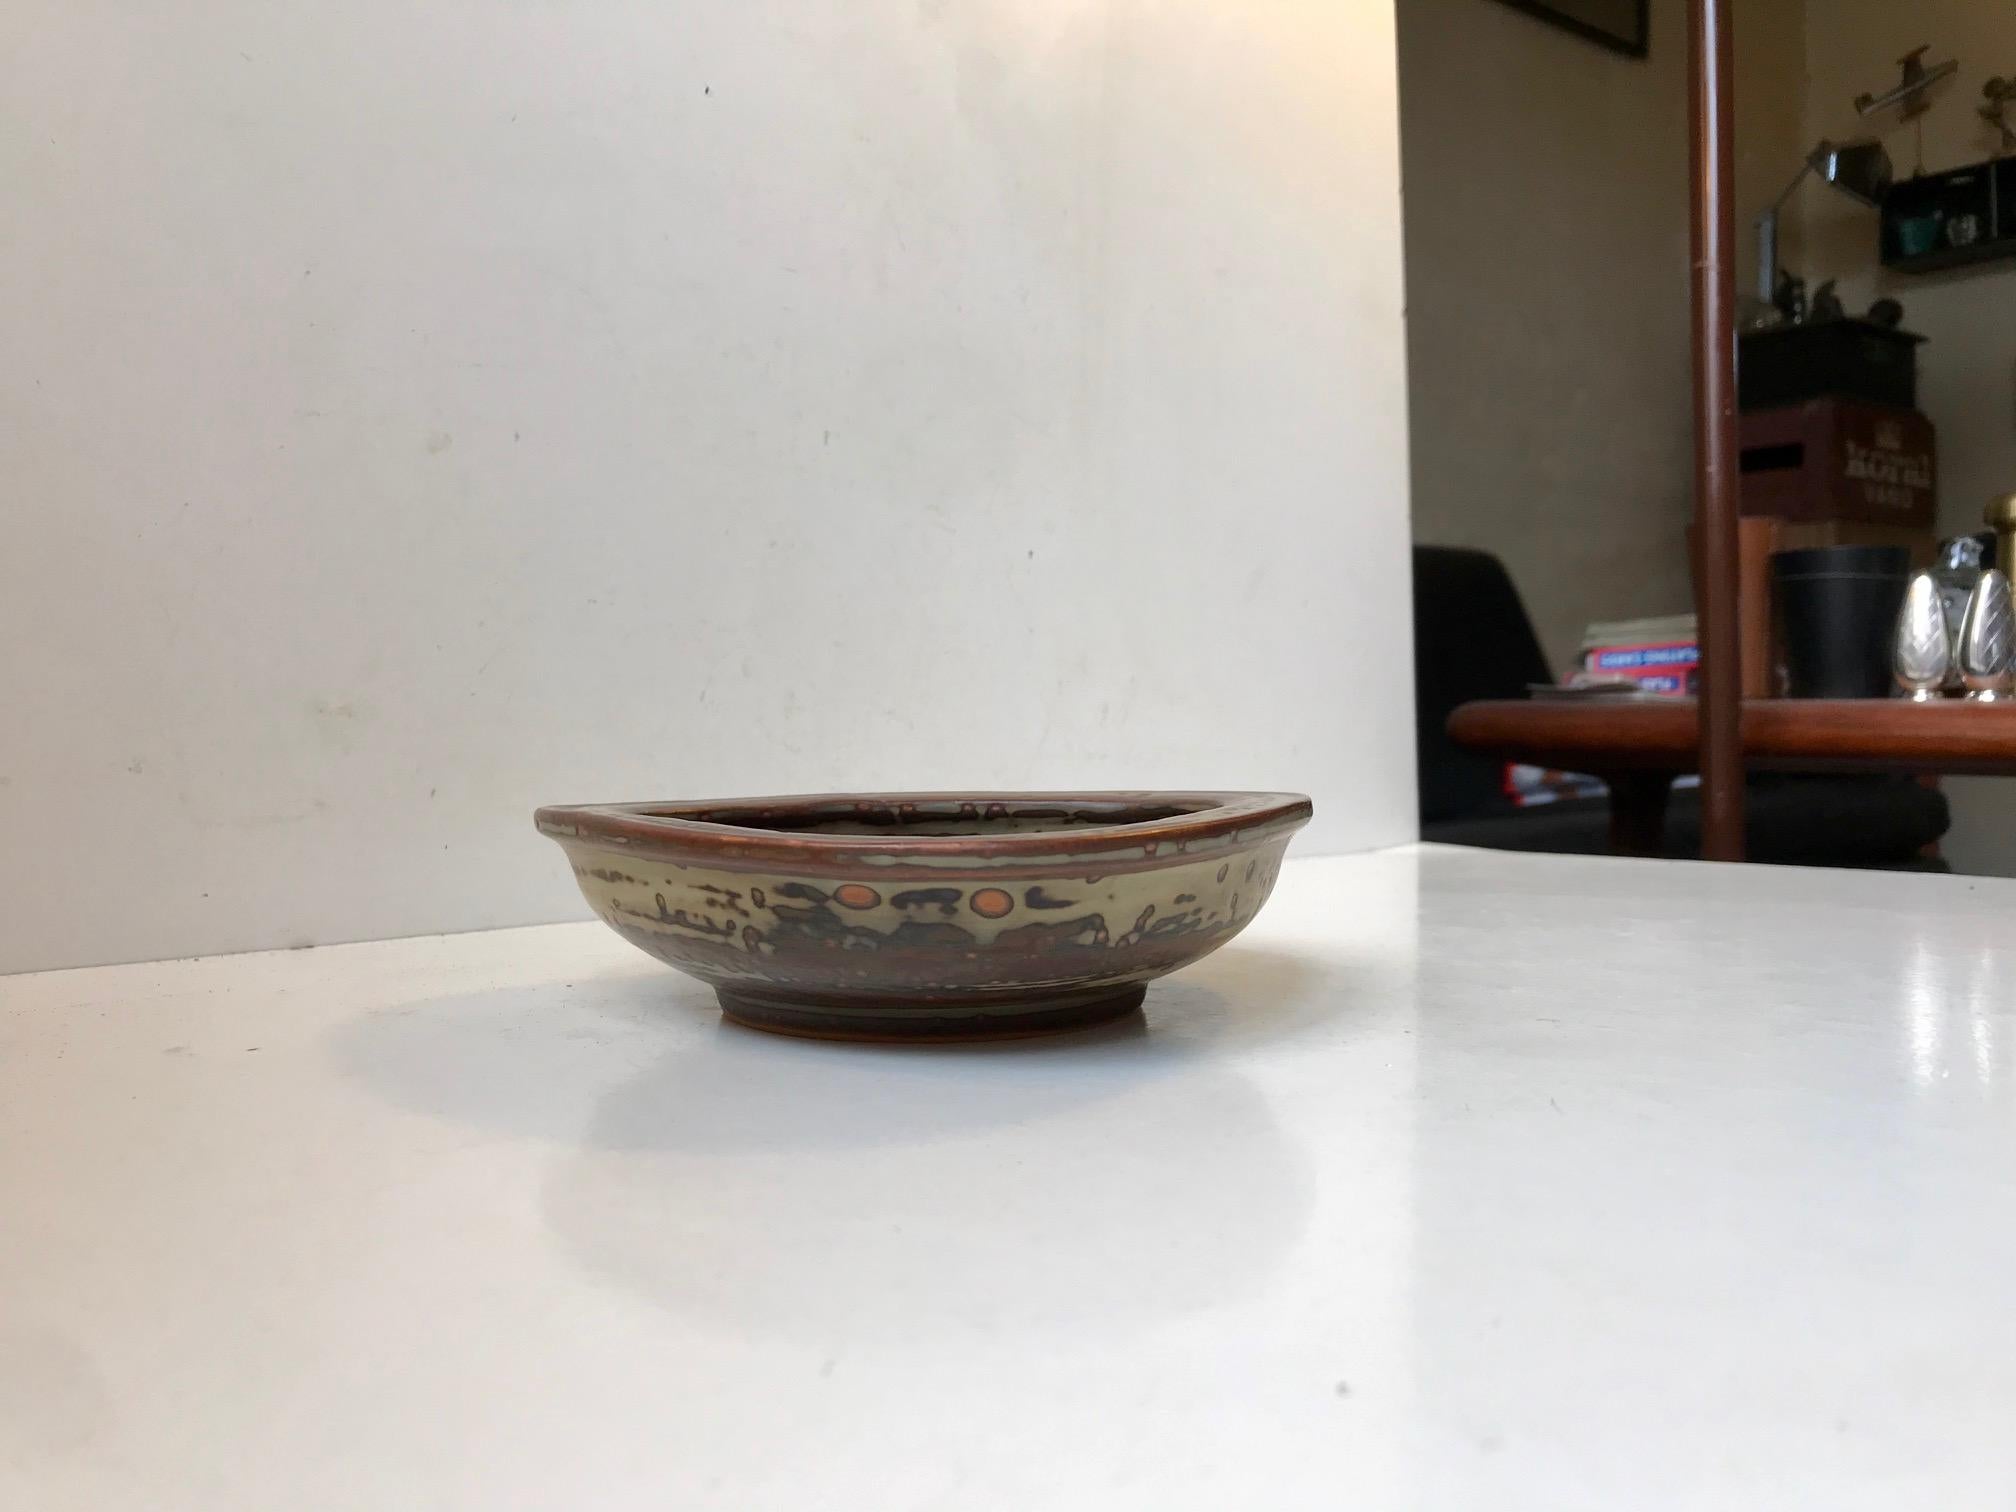 Organically shaped stoneware bowl in earthy sung and crystalline glazes. It was designed by Danish ceramist Bode Willumsen and manufactured by Royal Copenhagen in the late 1940s or early 1950s. Design number 20162.
Early on in his career Bode